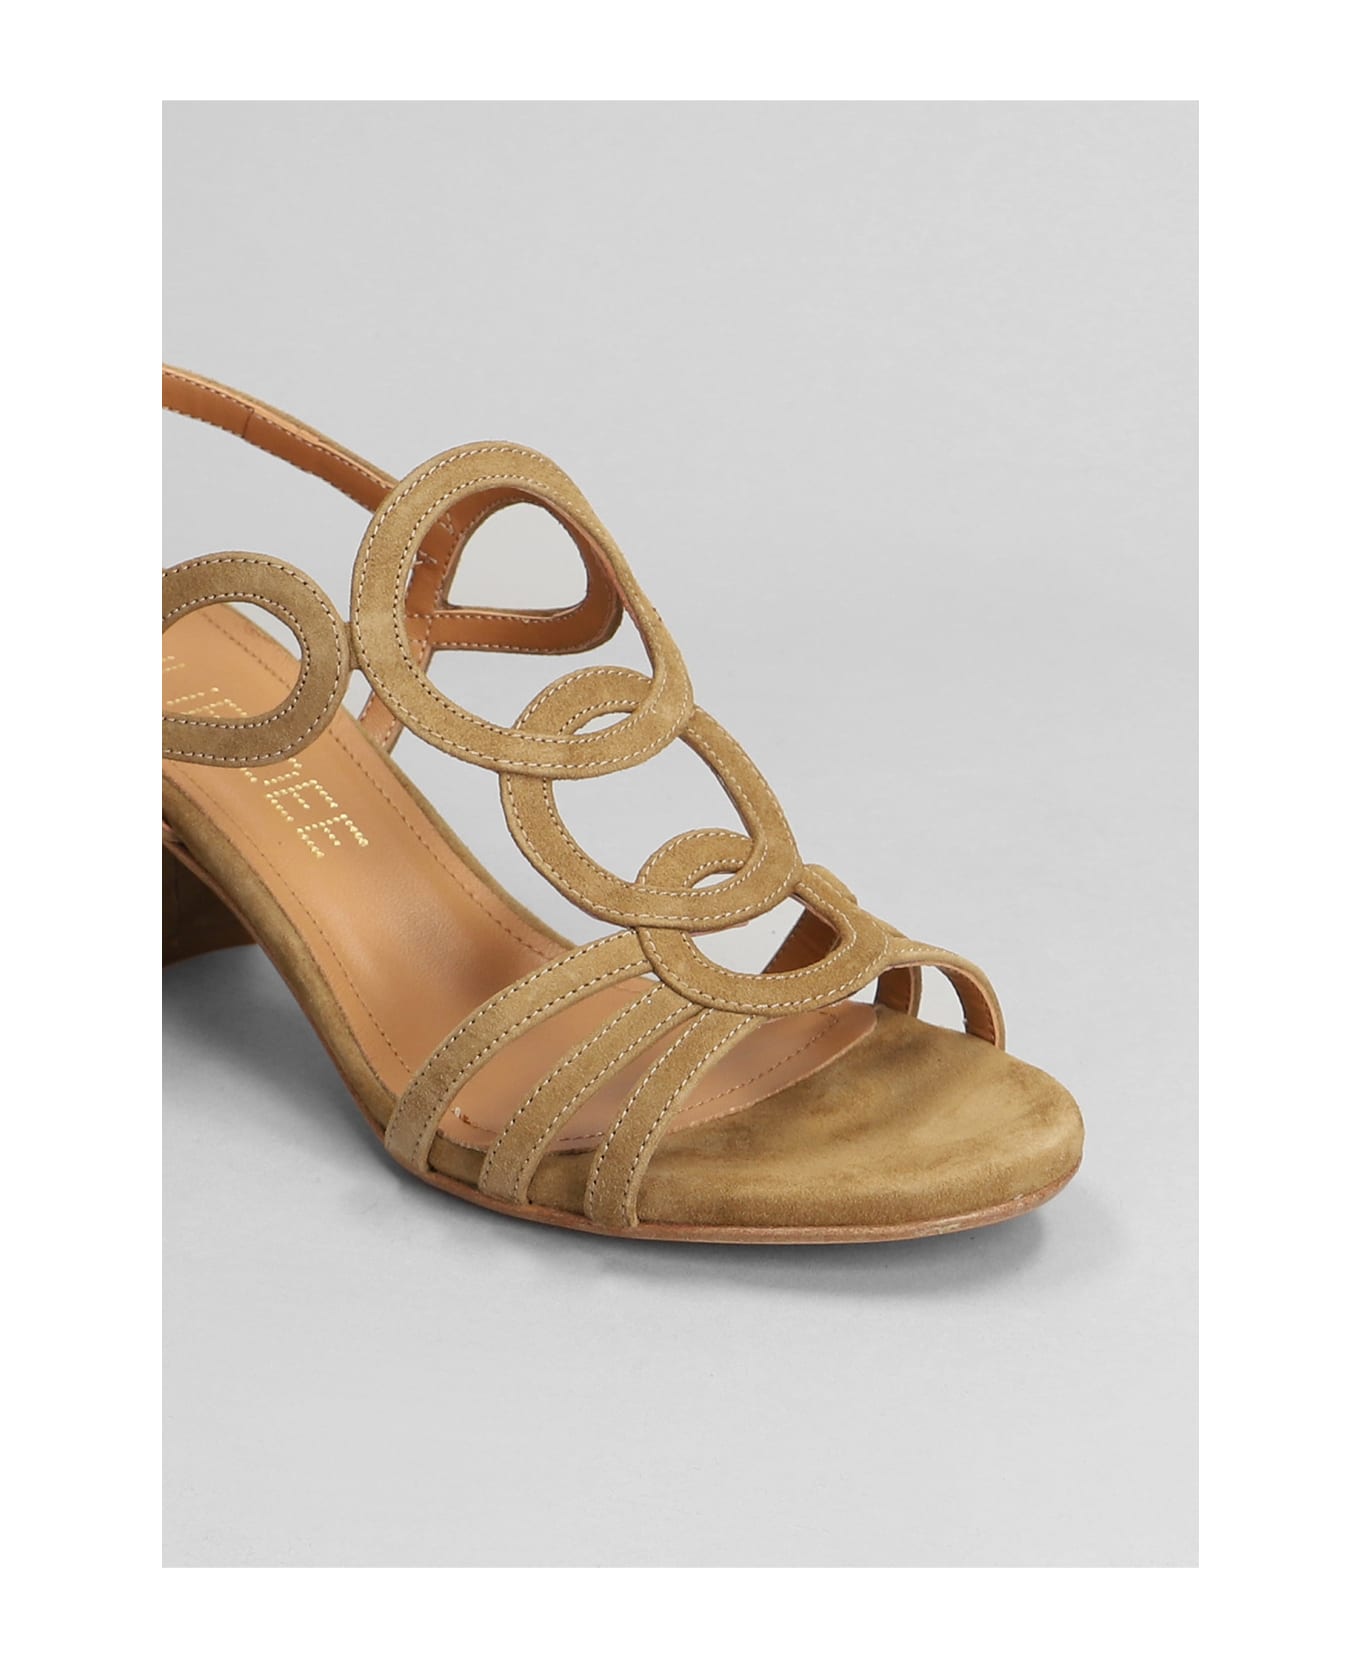 Julie Dee Sandals In Leather Color Suede - leather color